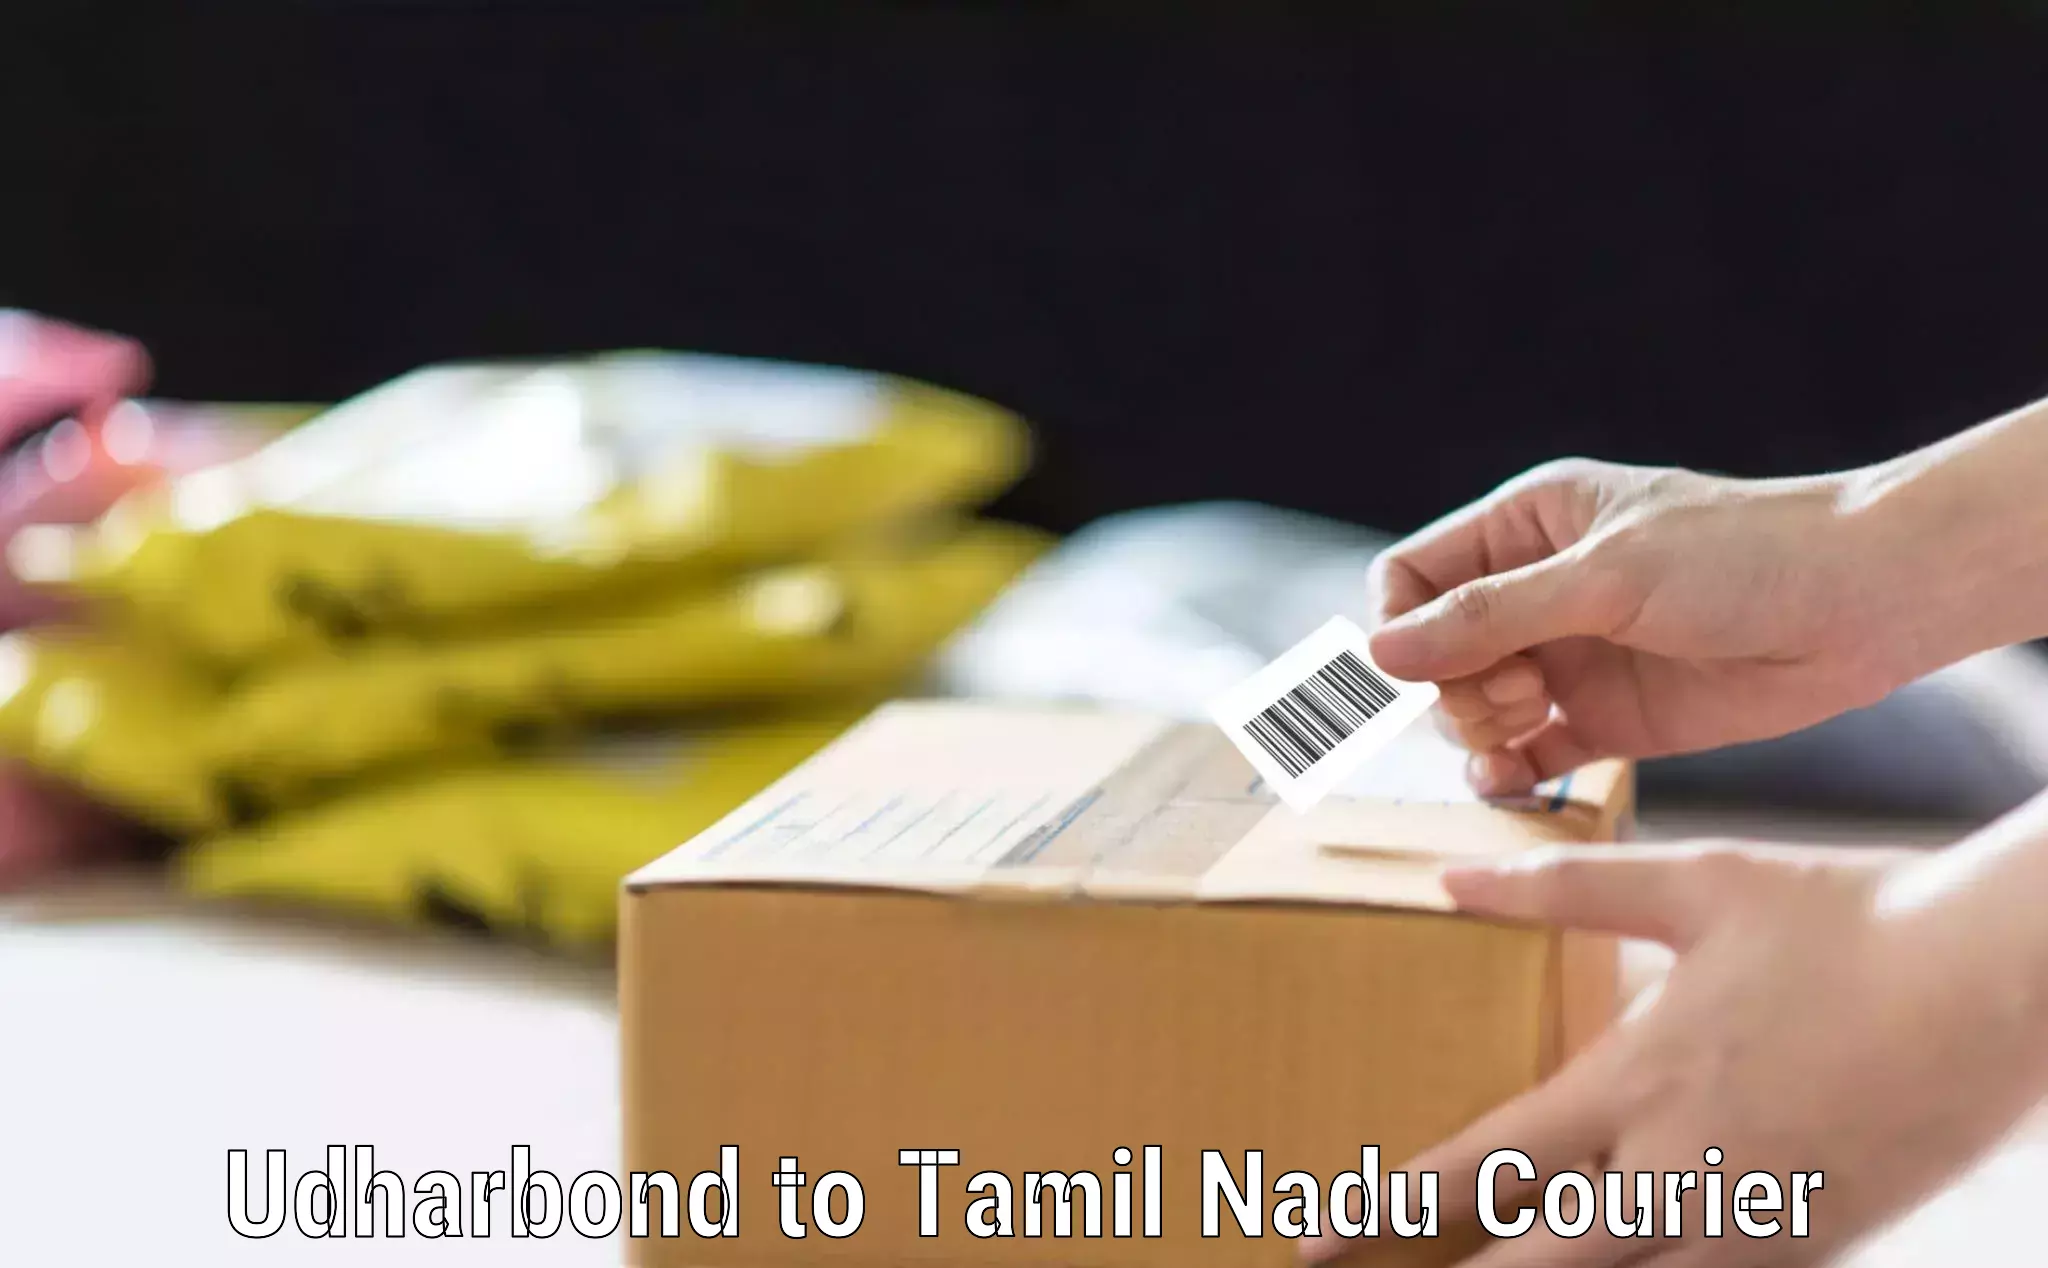 Instant baggage transport quote Udharbond to Pennagaram